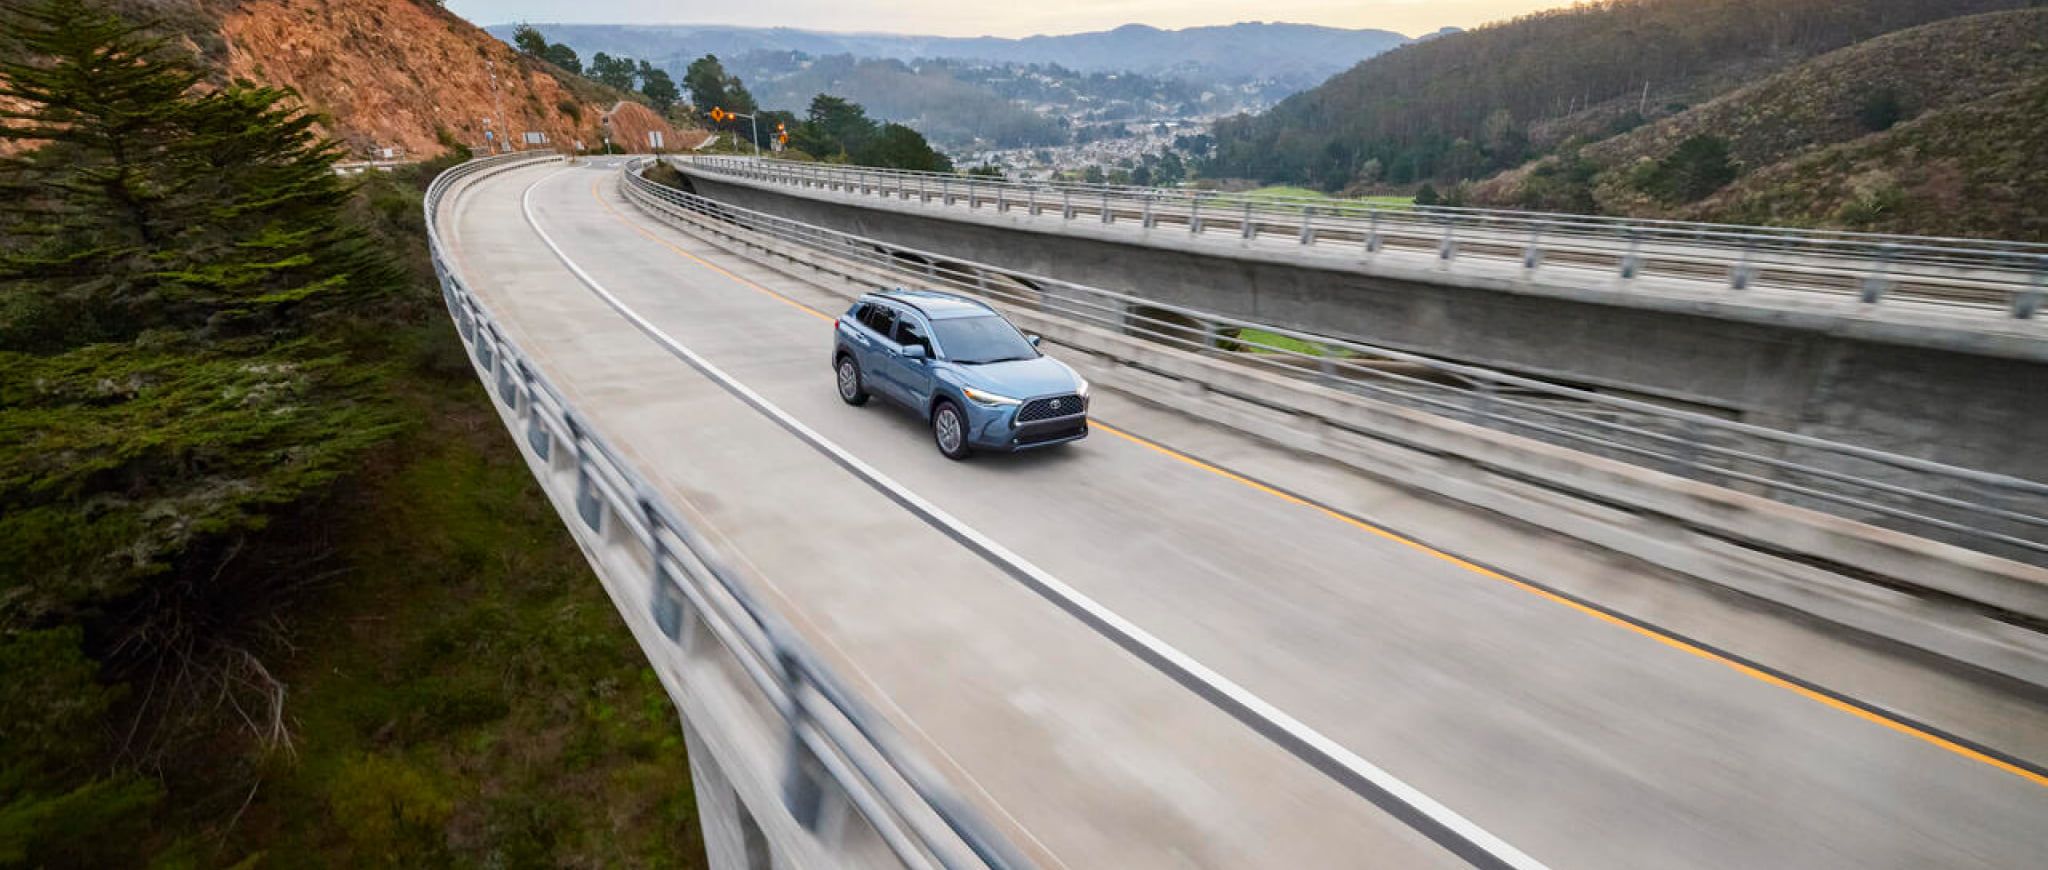 A 2022 Toyota Corolla Cross driving on a mountain highway.